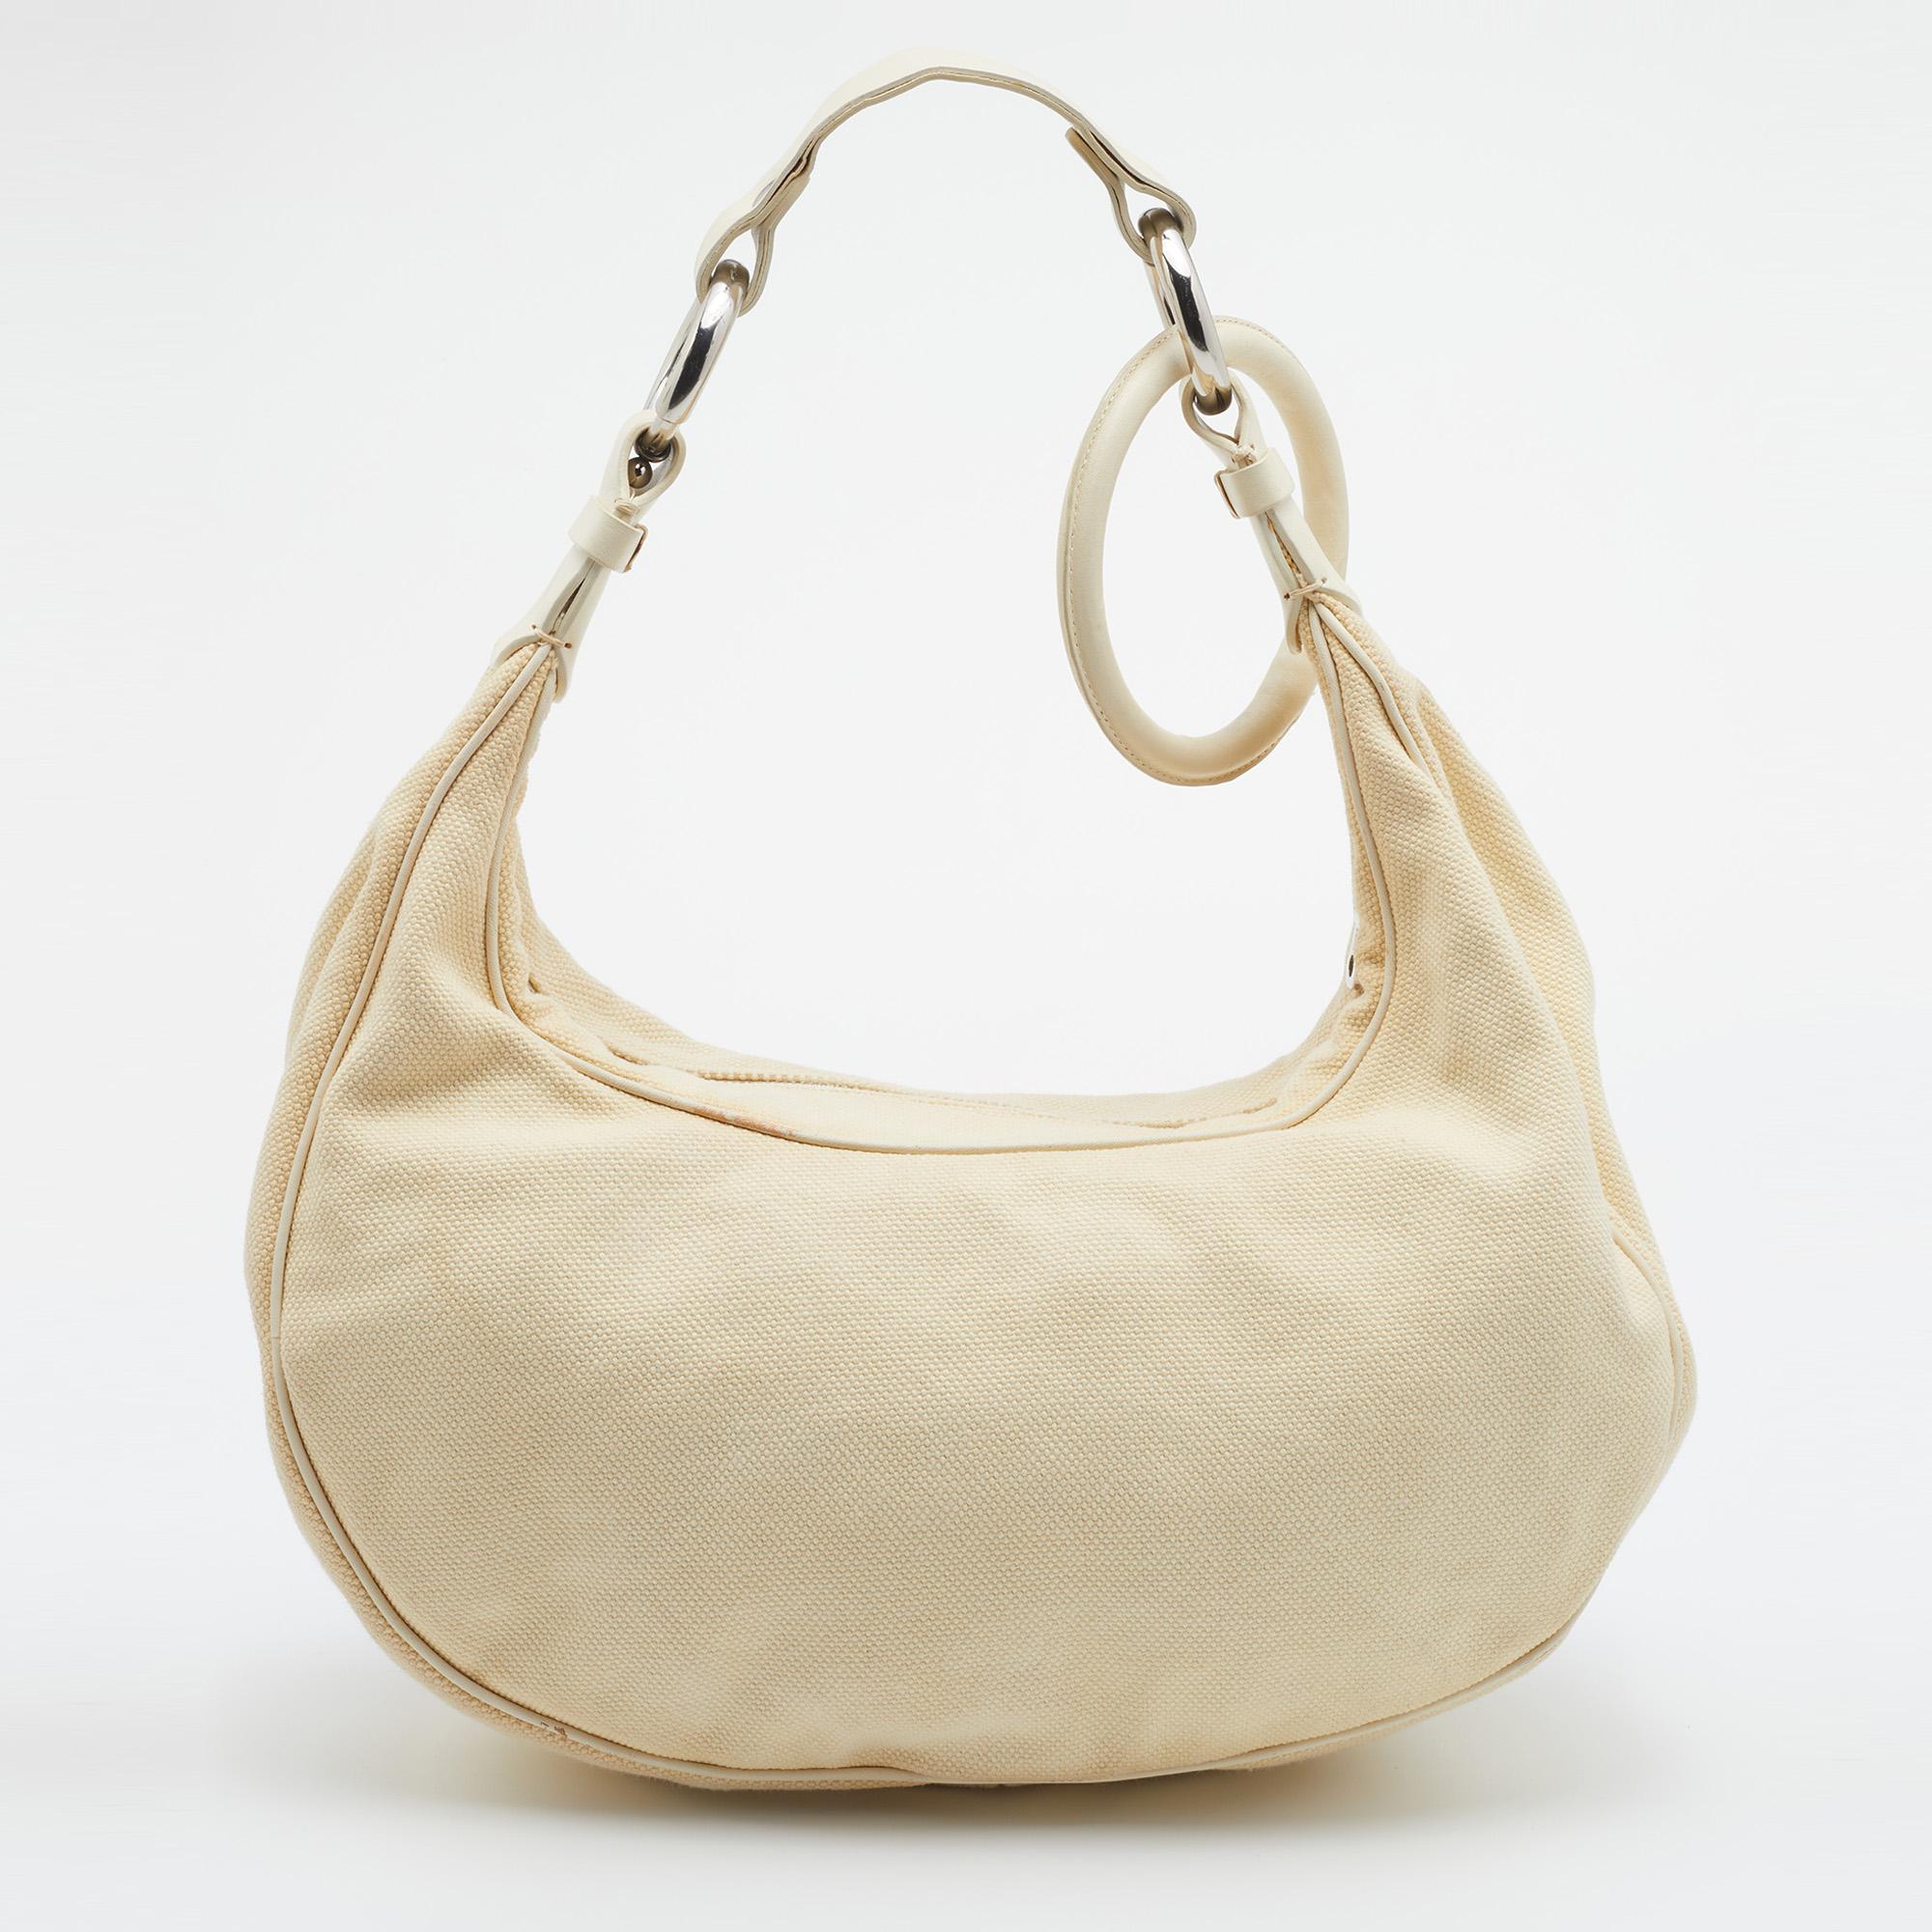 Feminine and classy, this Chloe hobo is made from canvas and leather. Featuring a single handle and a zip closure to secure the fabric-lined interior, this pretty bag is the right choice for your daily essentials. Turn heads with it!
